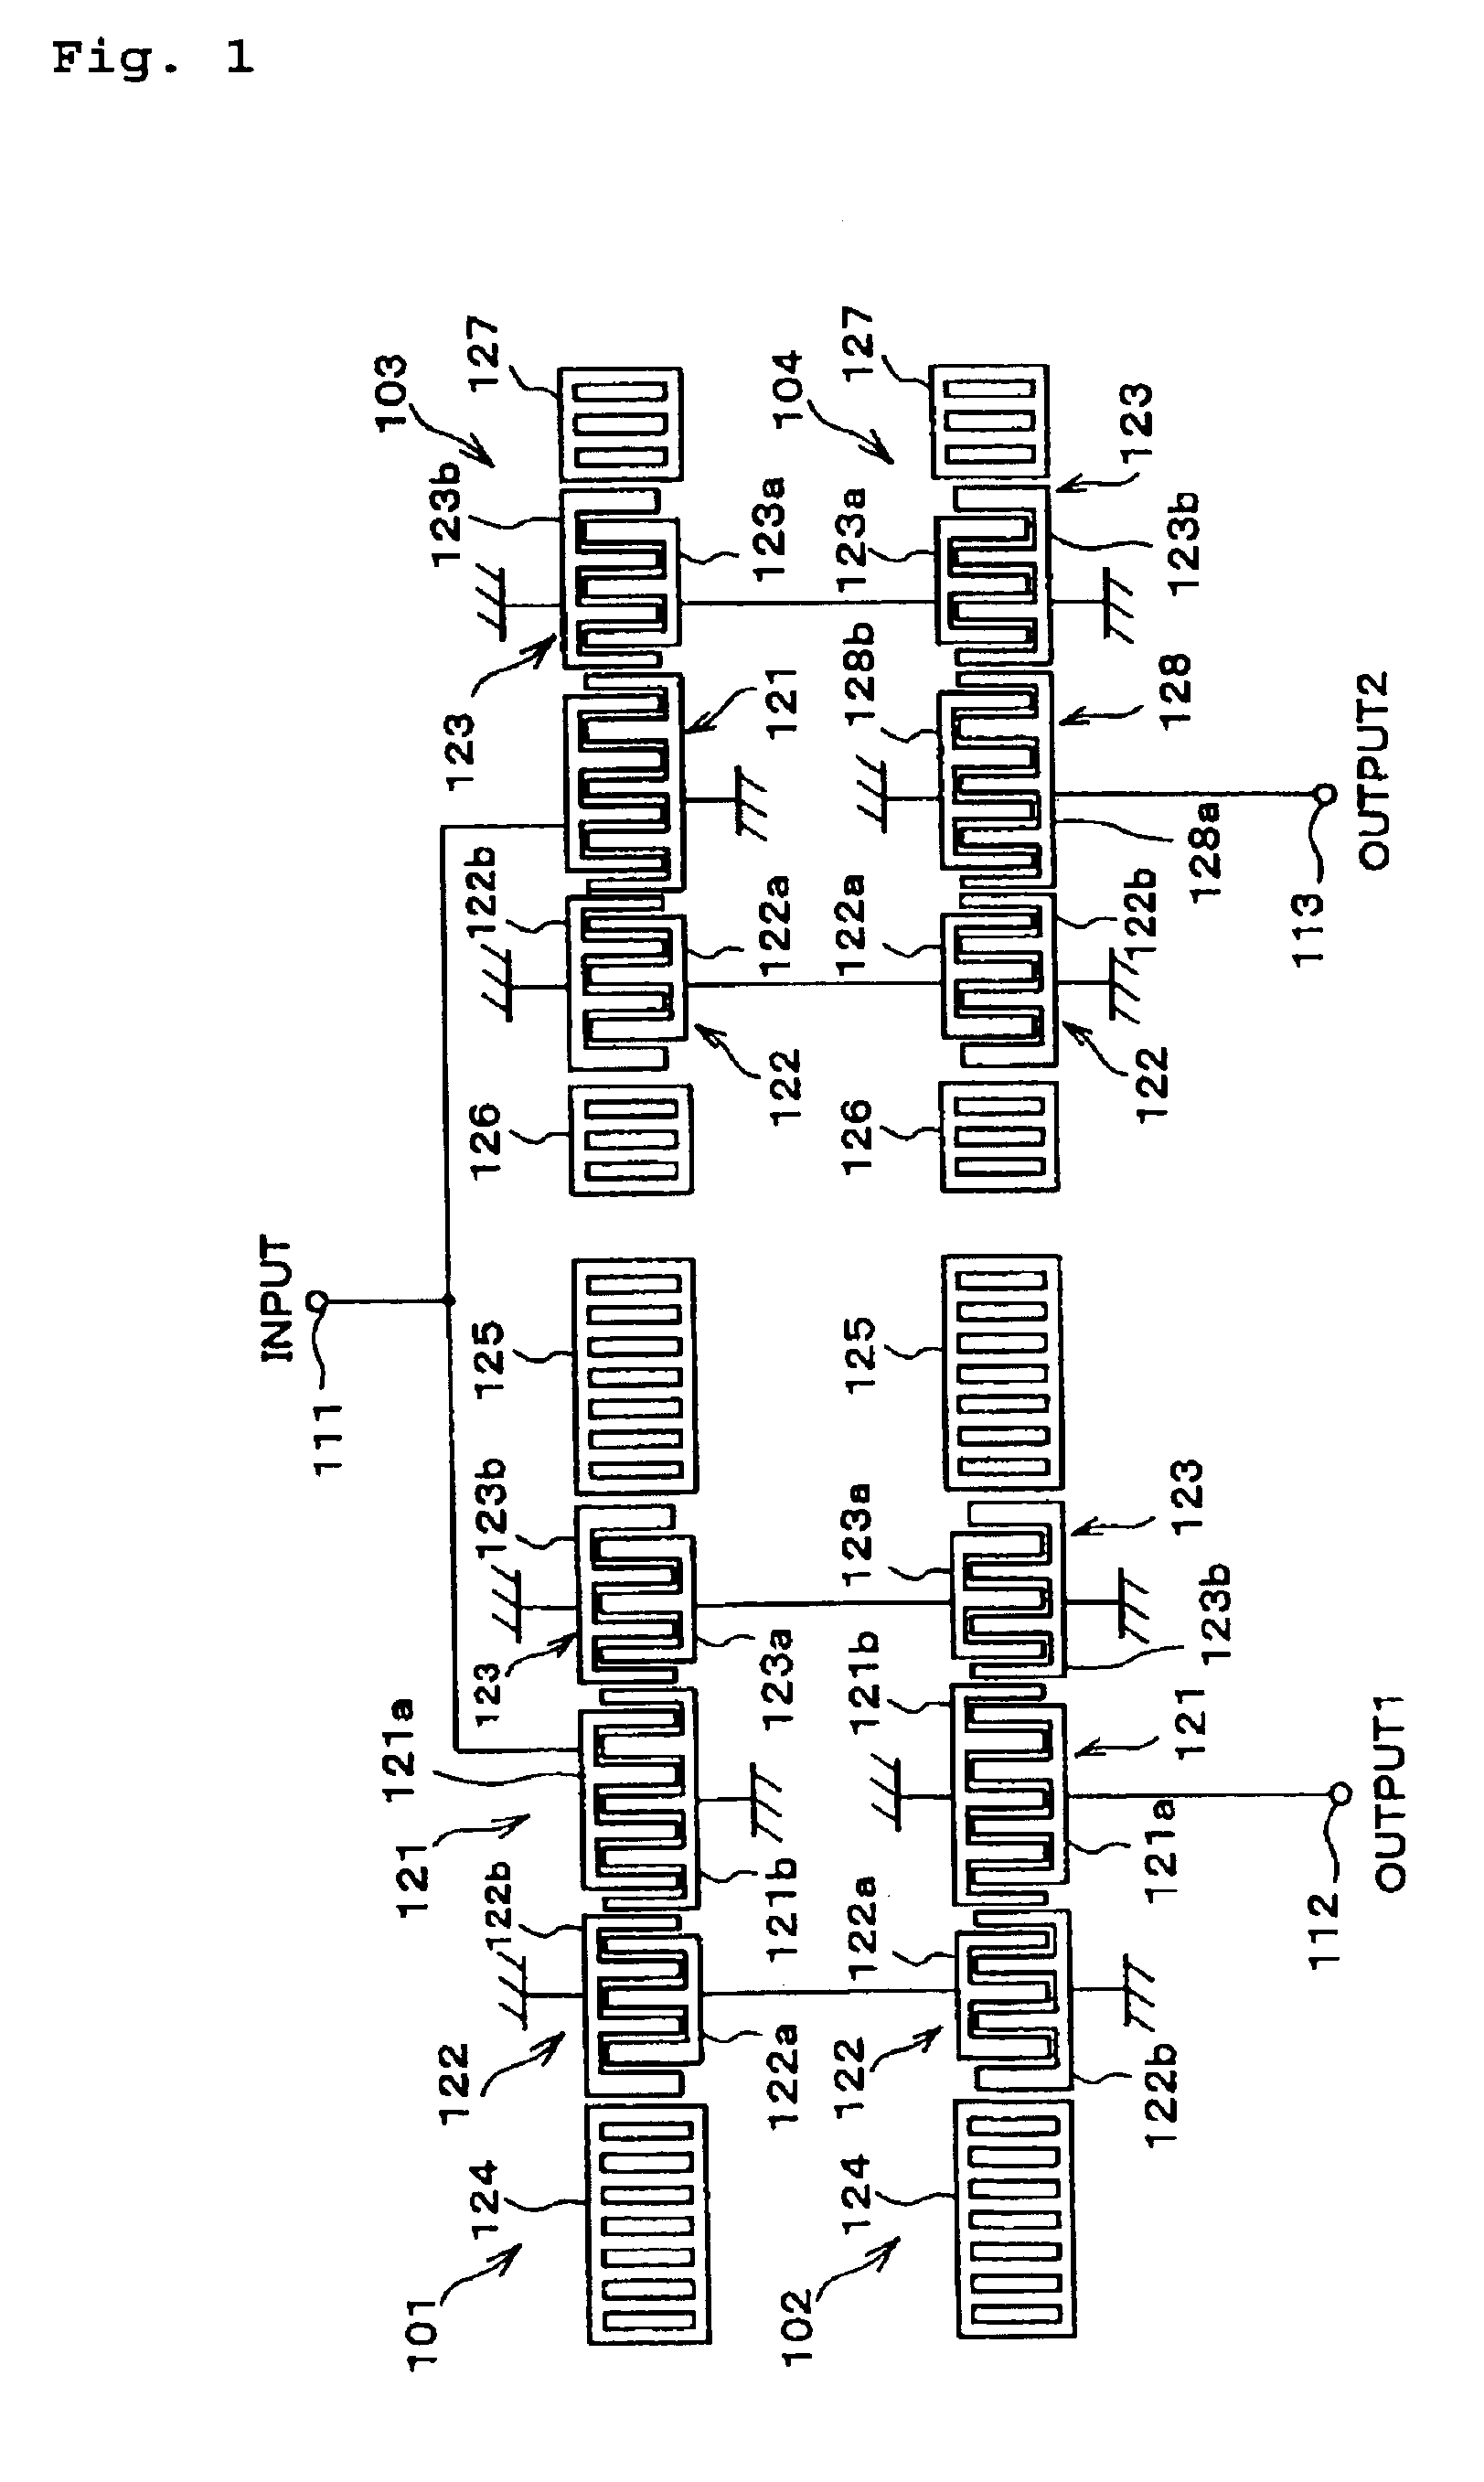 Surface acoustic wave filter apparatus having different structure reflectors